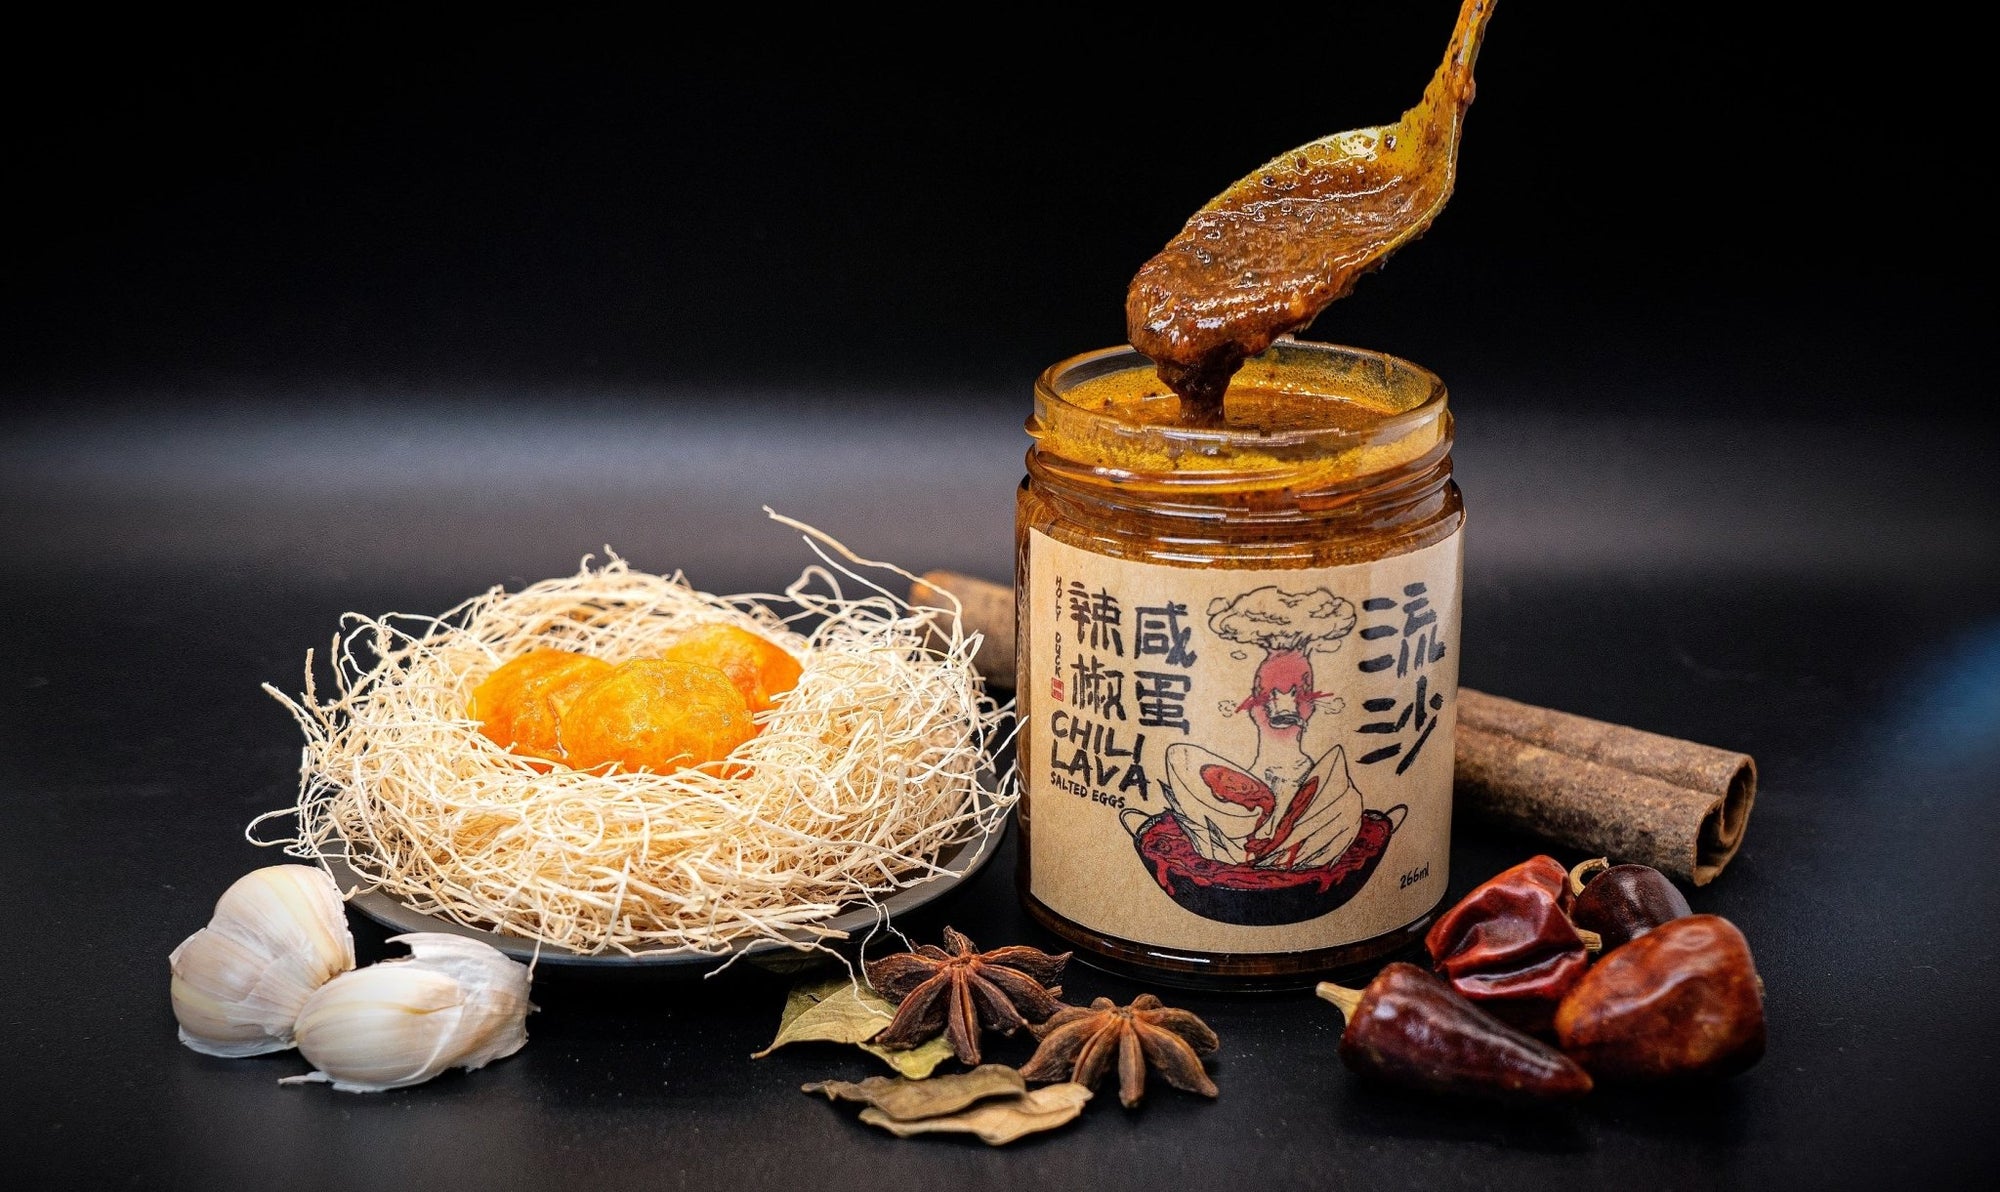 Holy Duck Chili Lava Salted Eggs - Gourmet Condiments - Holy Duck Chili Oil Ltd